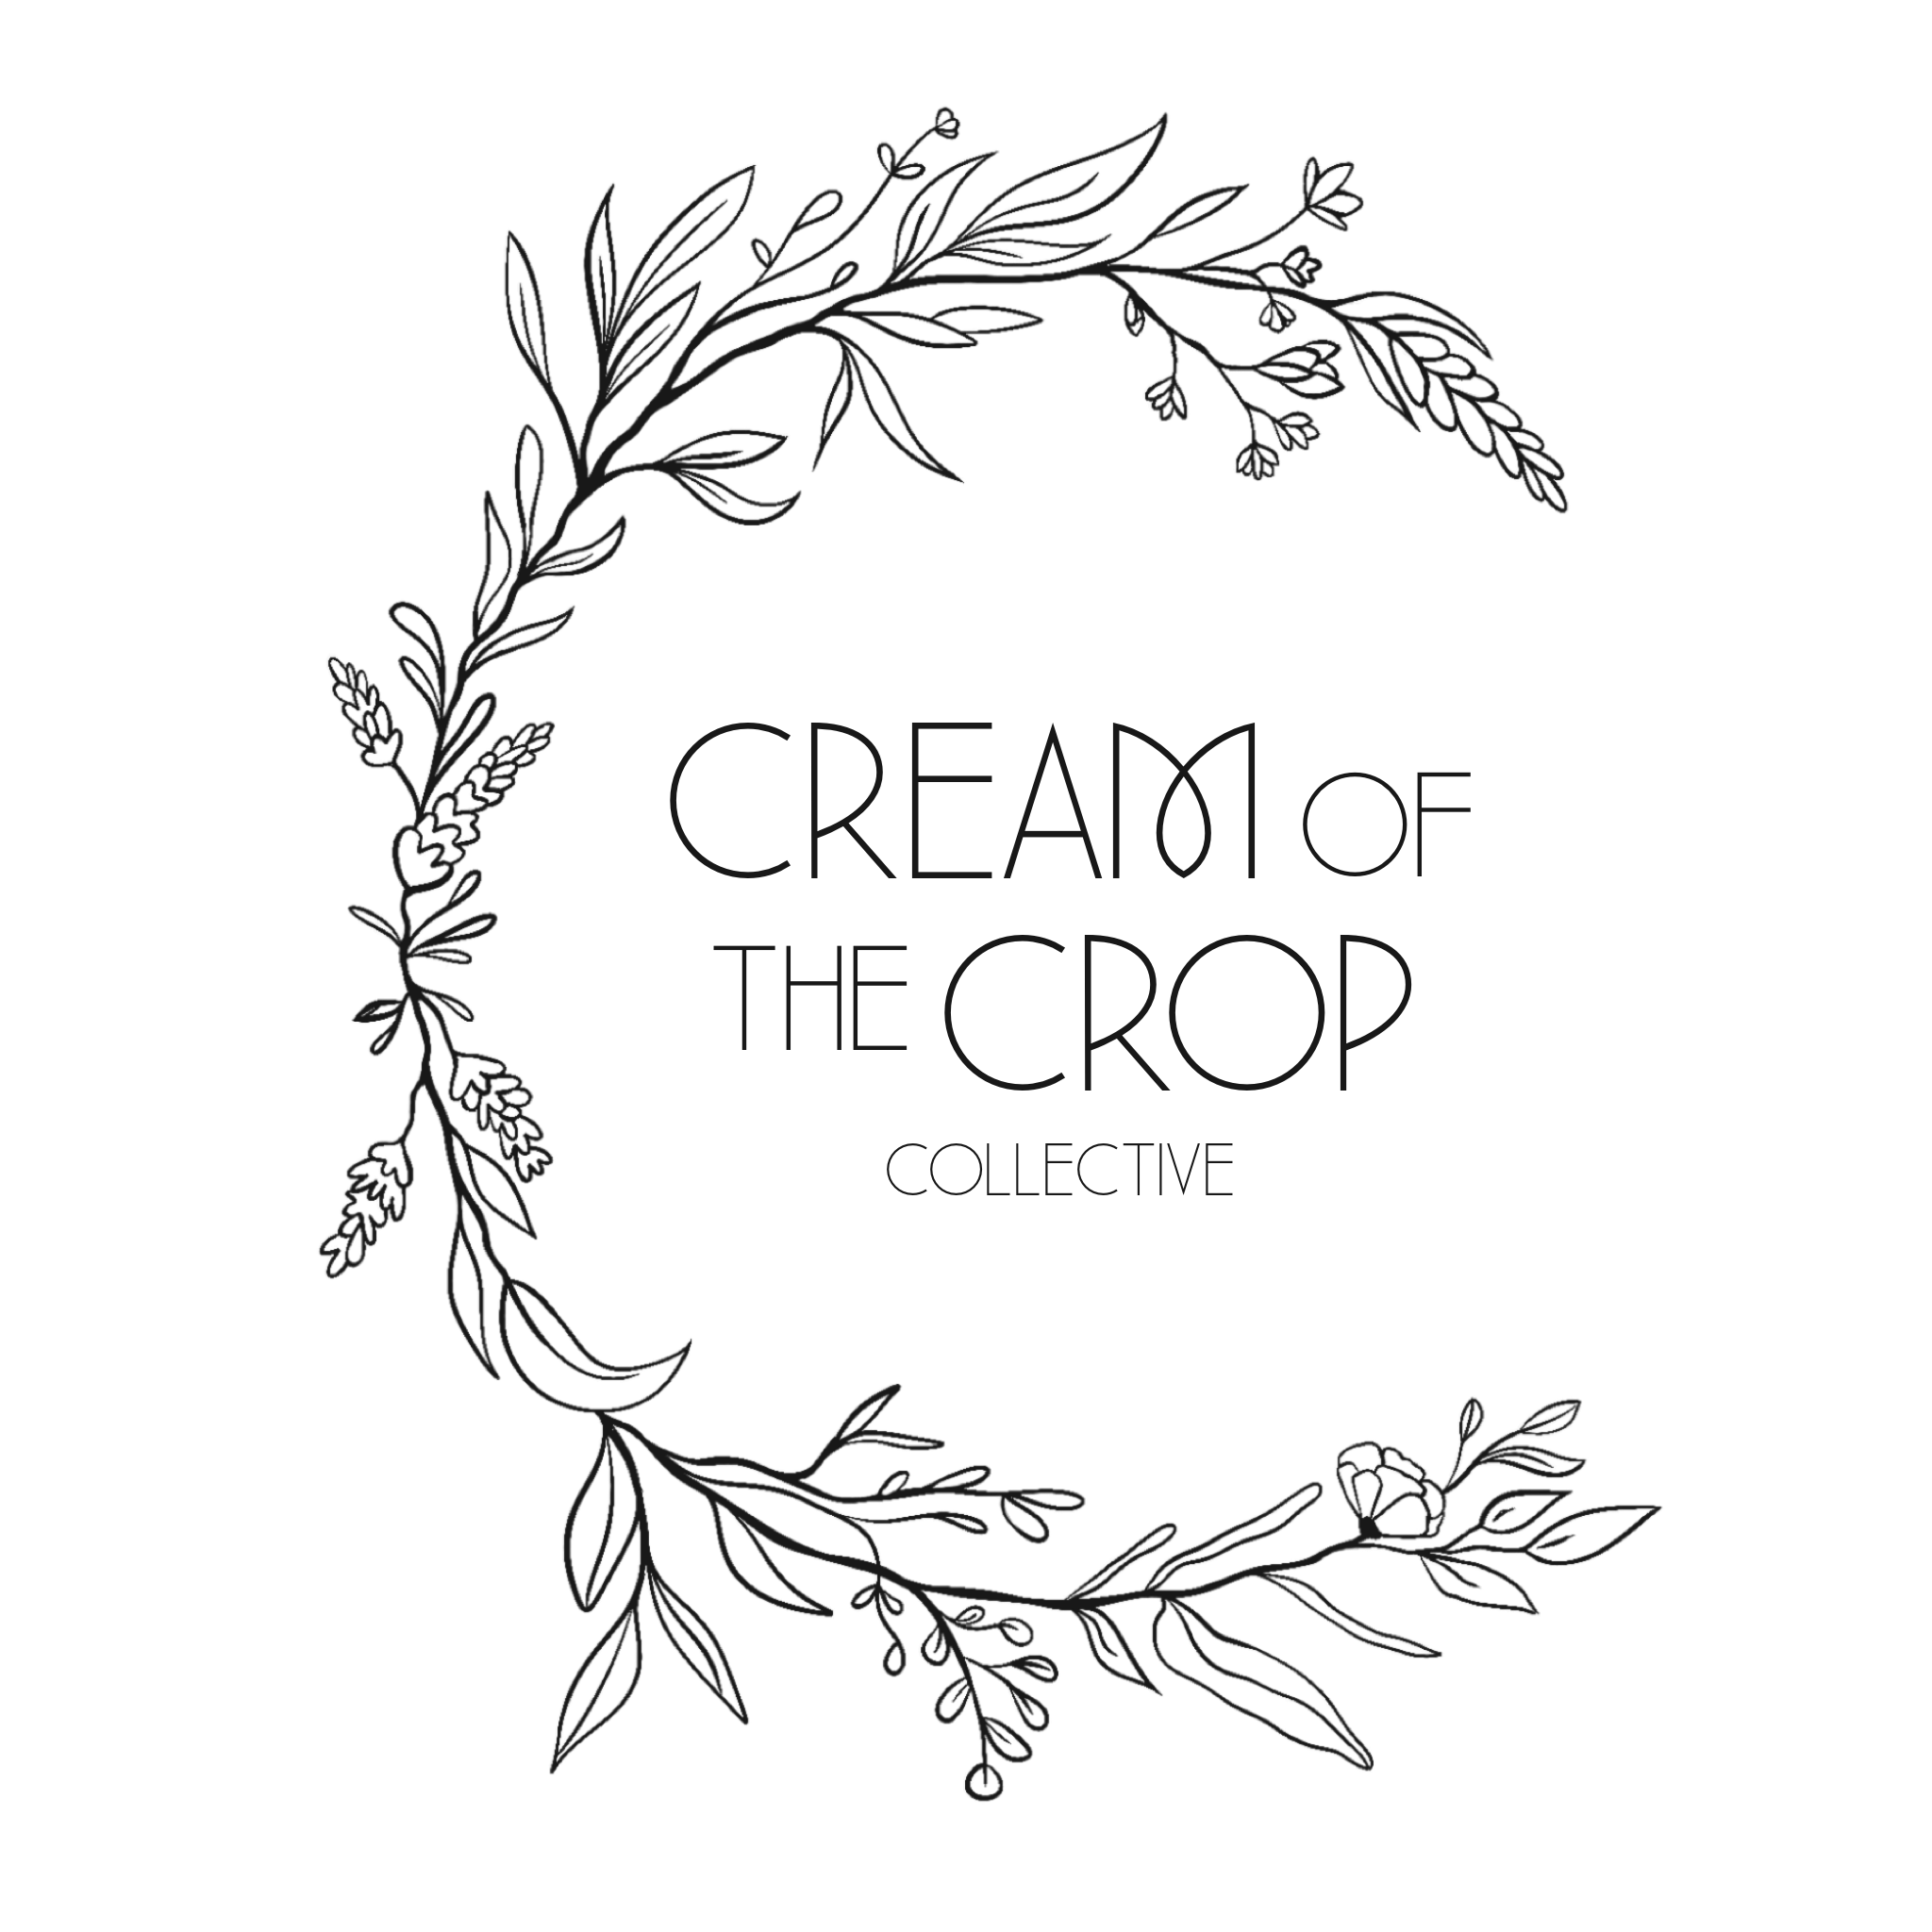 Cream of the Crop Collective